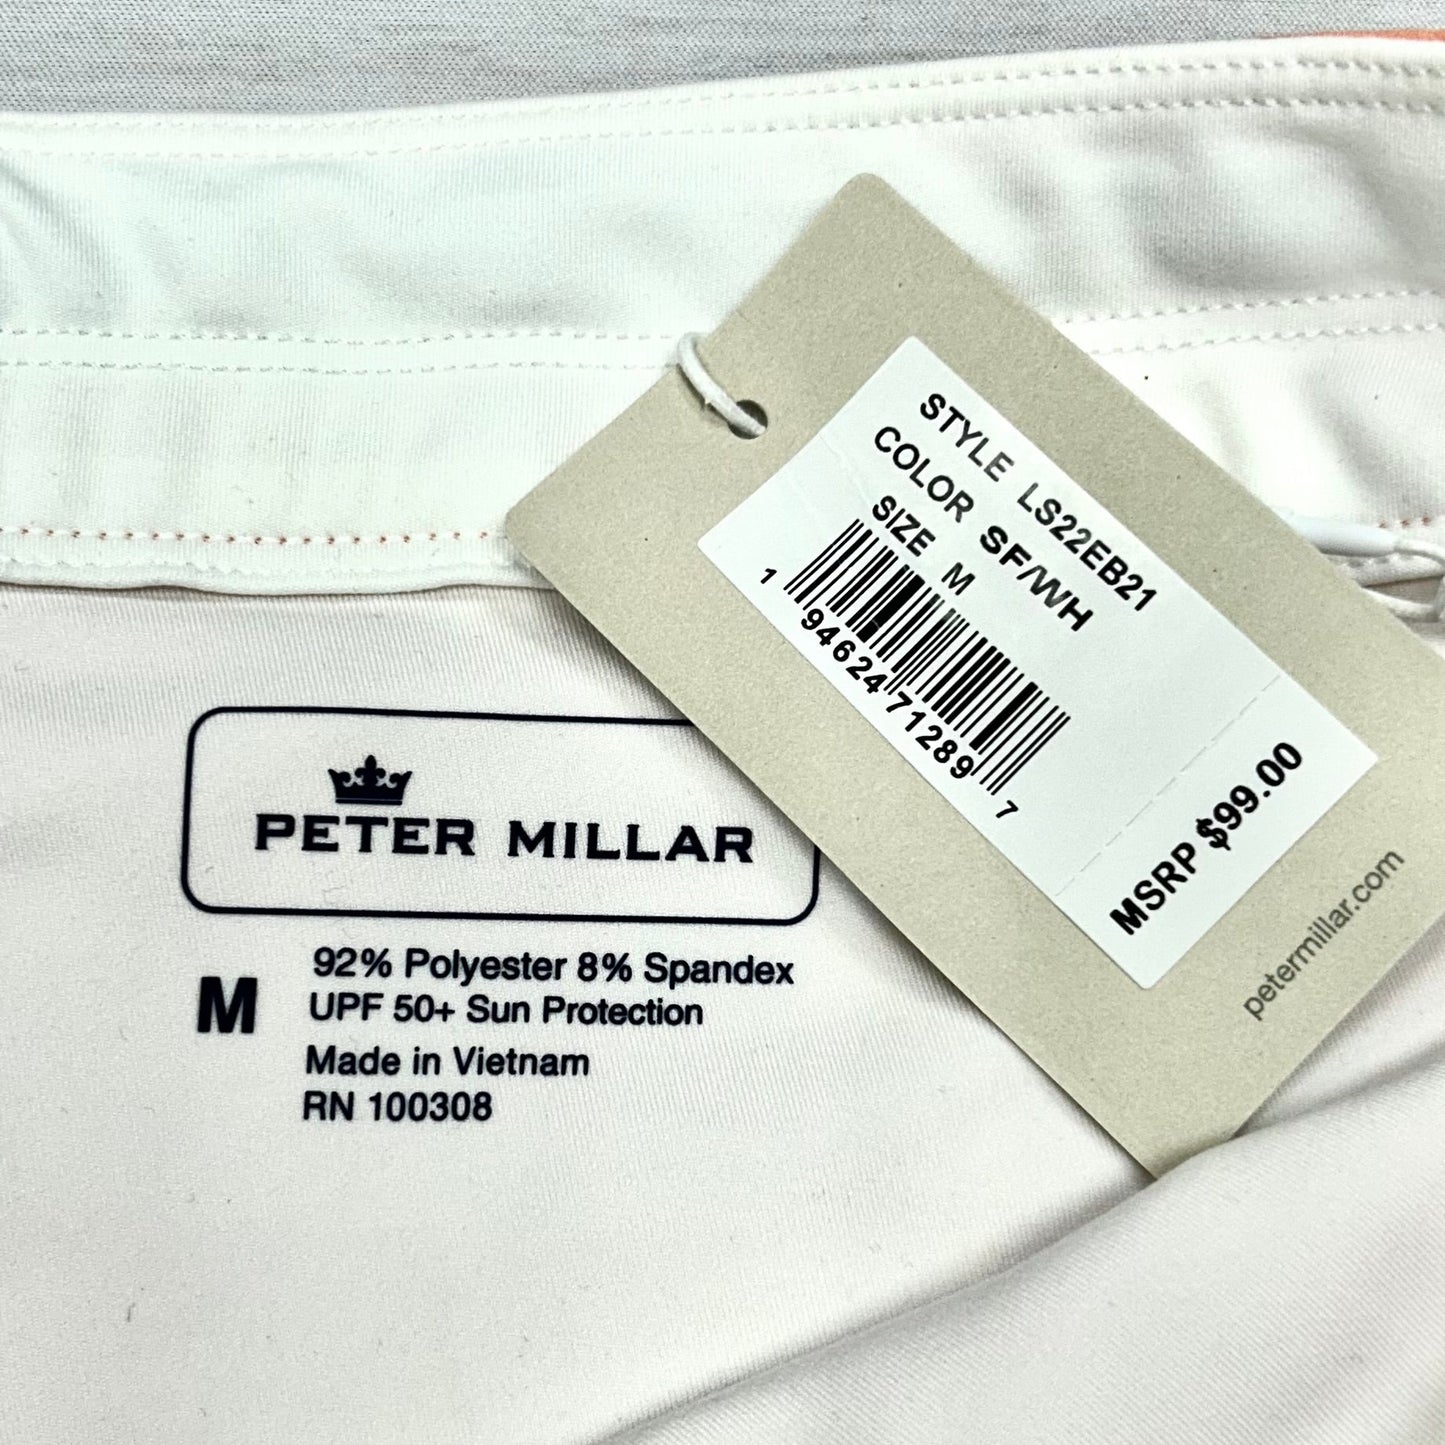 Athletic Skirt By Peter Millar  Size: M